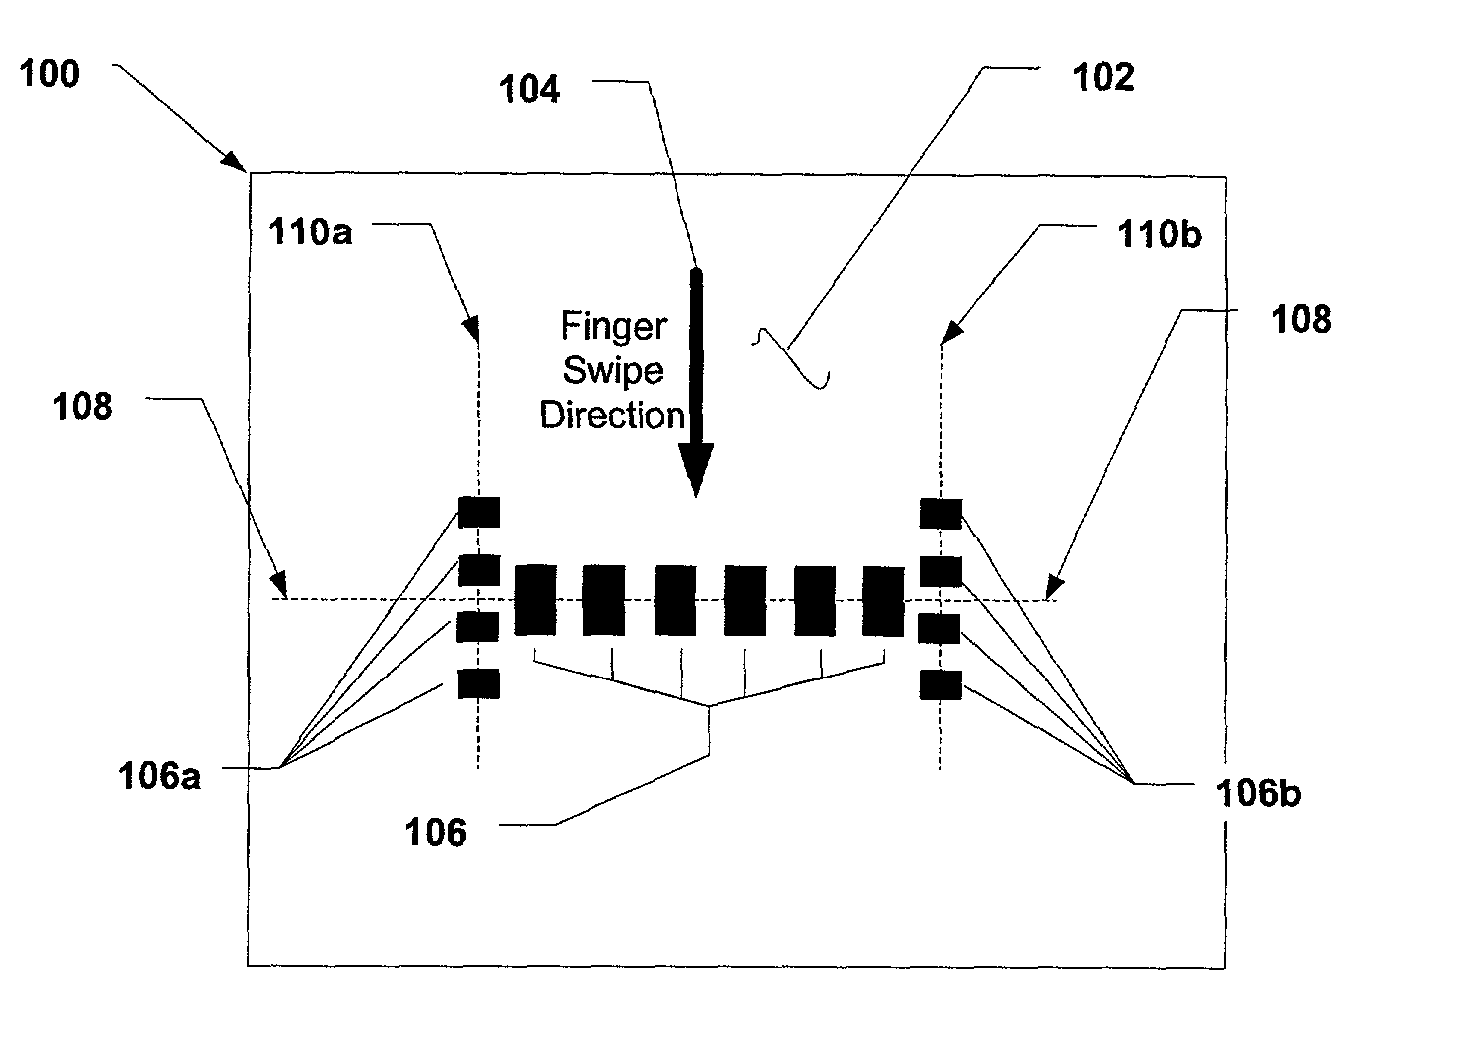 Sensor apparatus and method for use in imaging features of an object